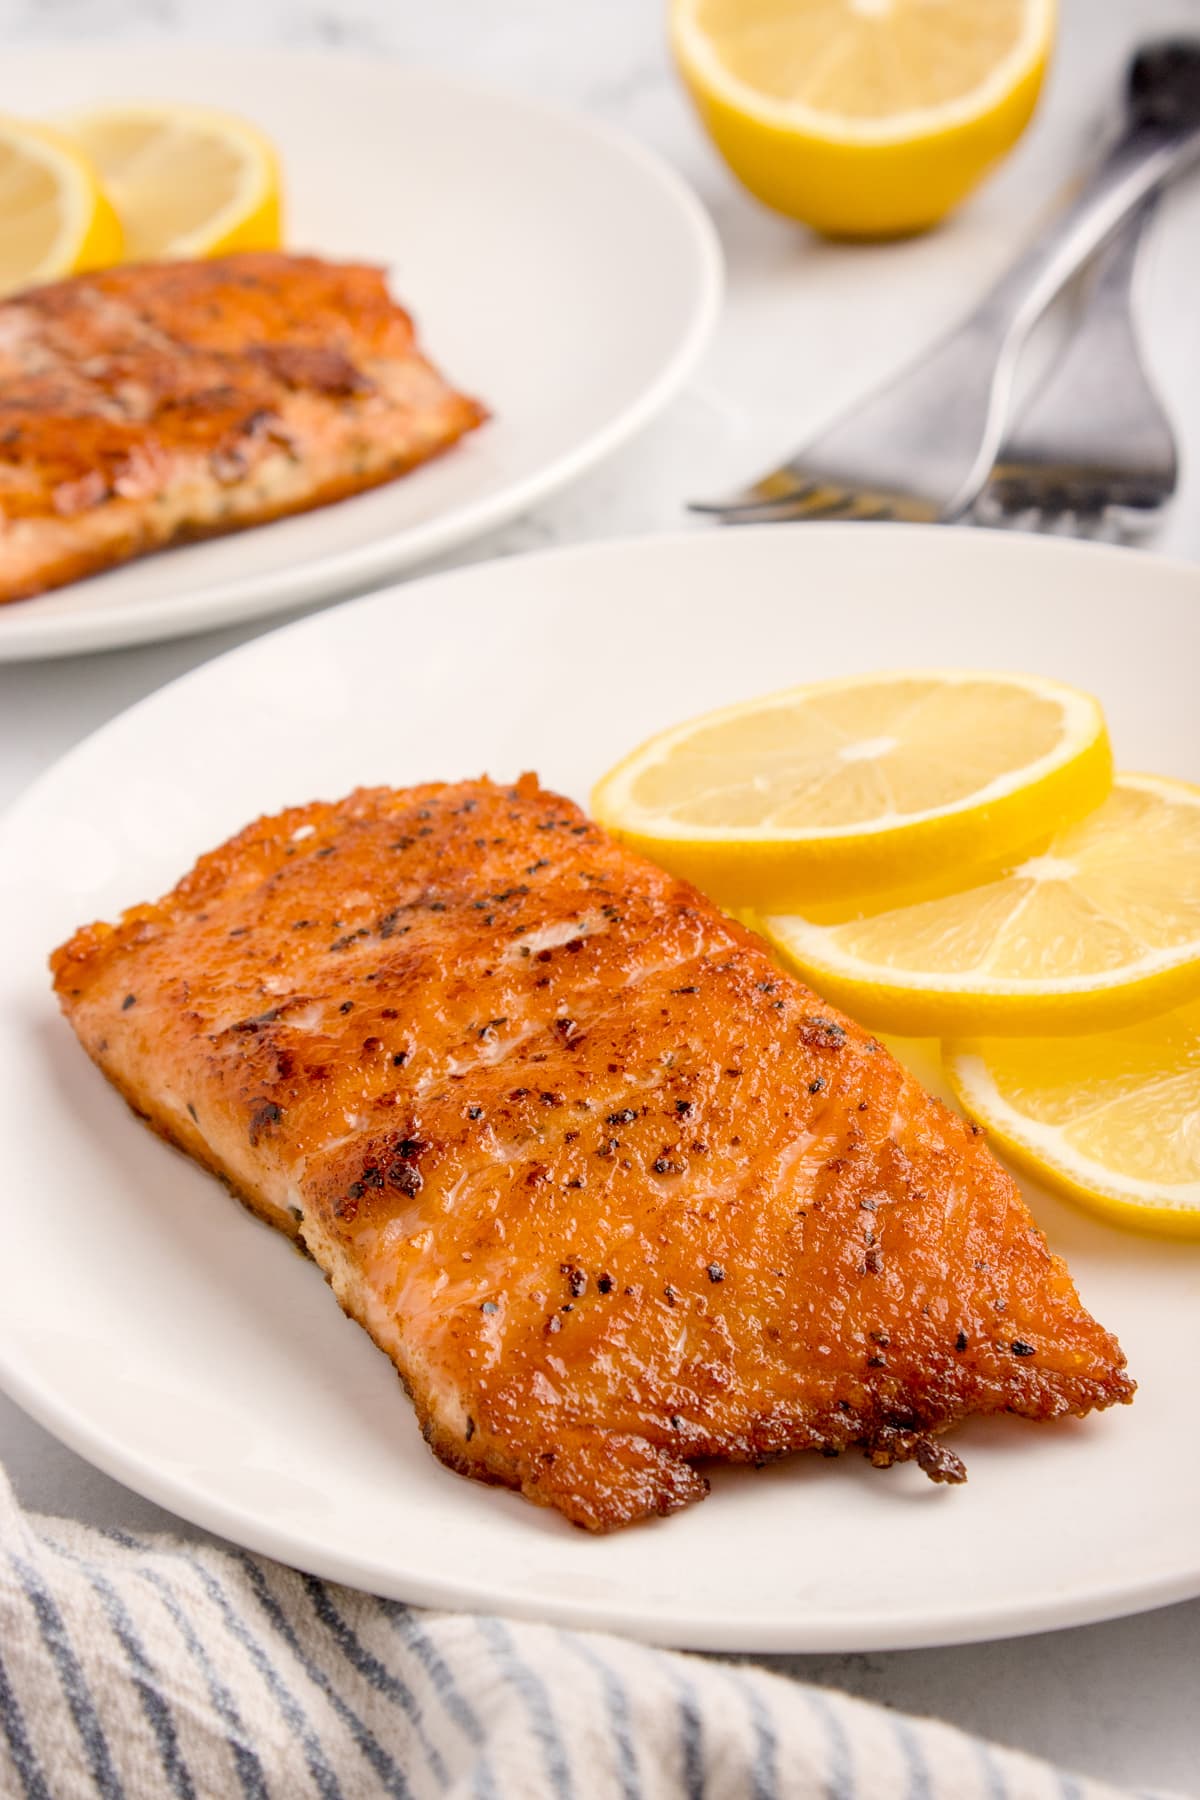 Sous Vide Salmon on white plate with slices of lemon